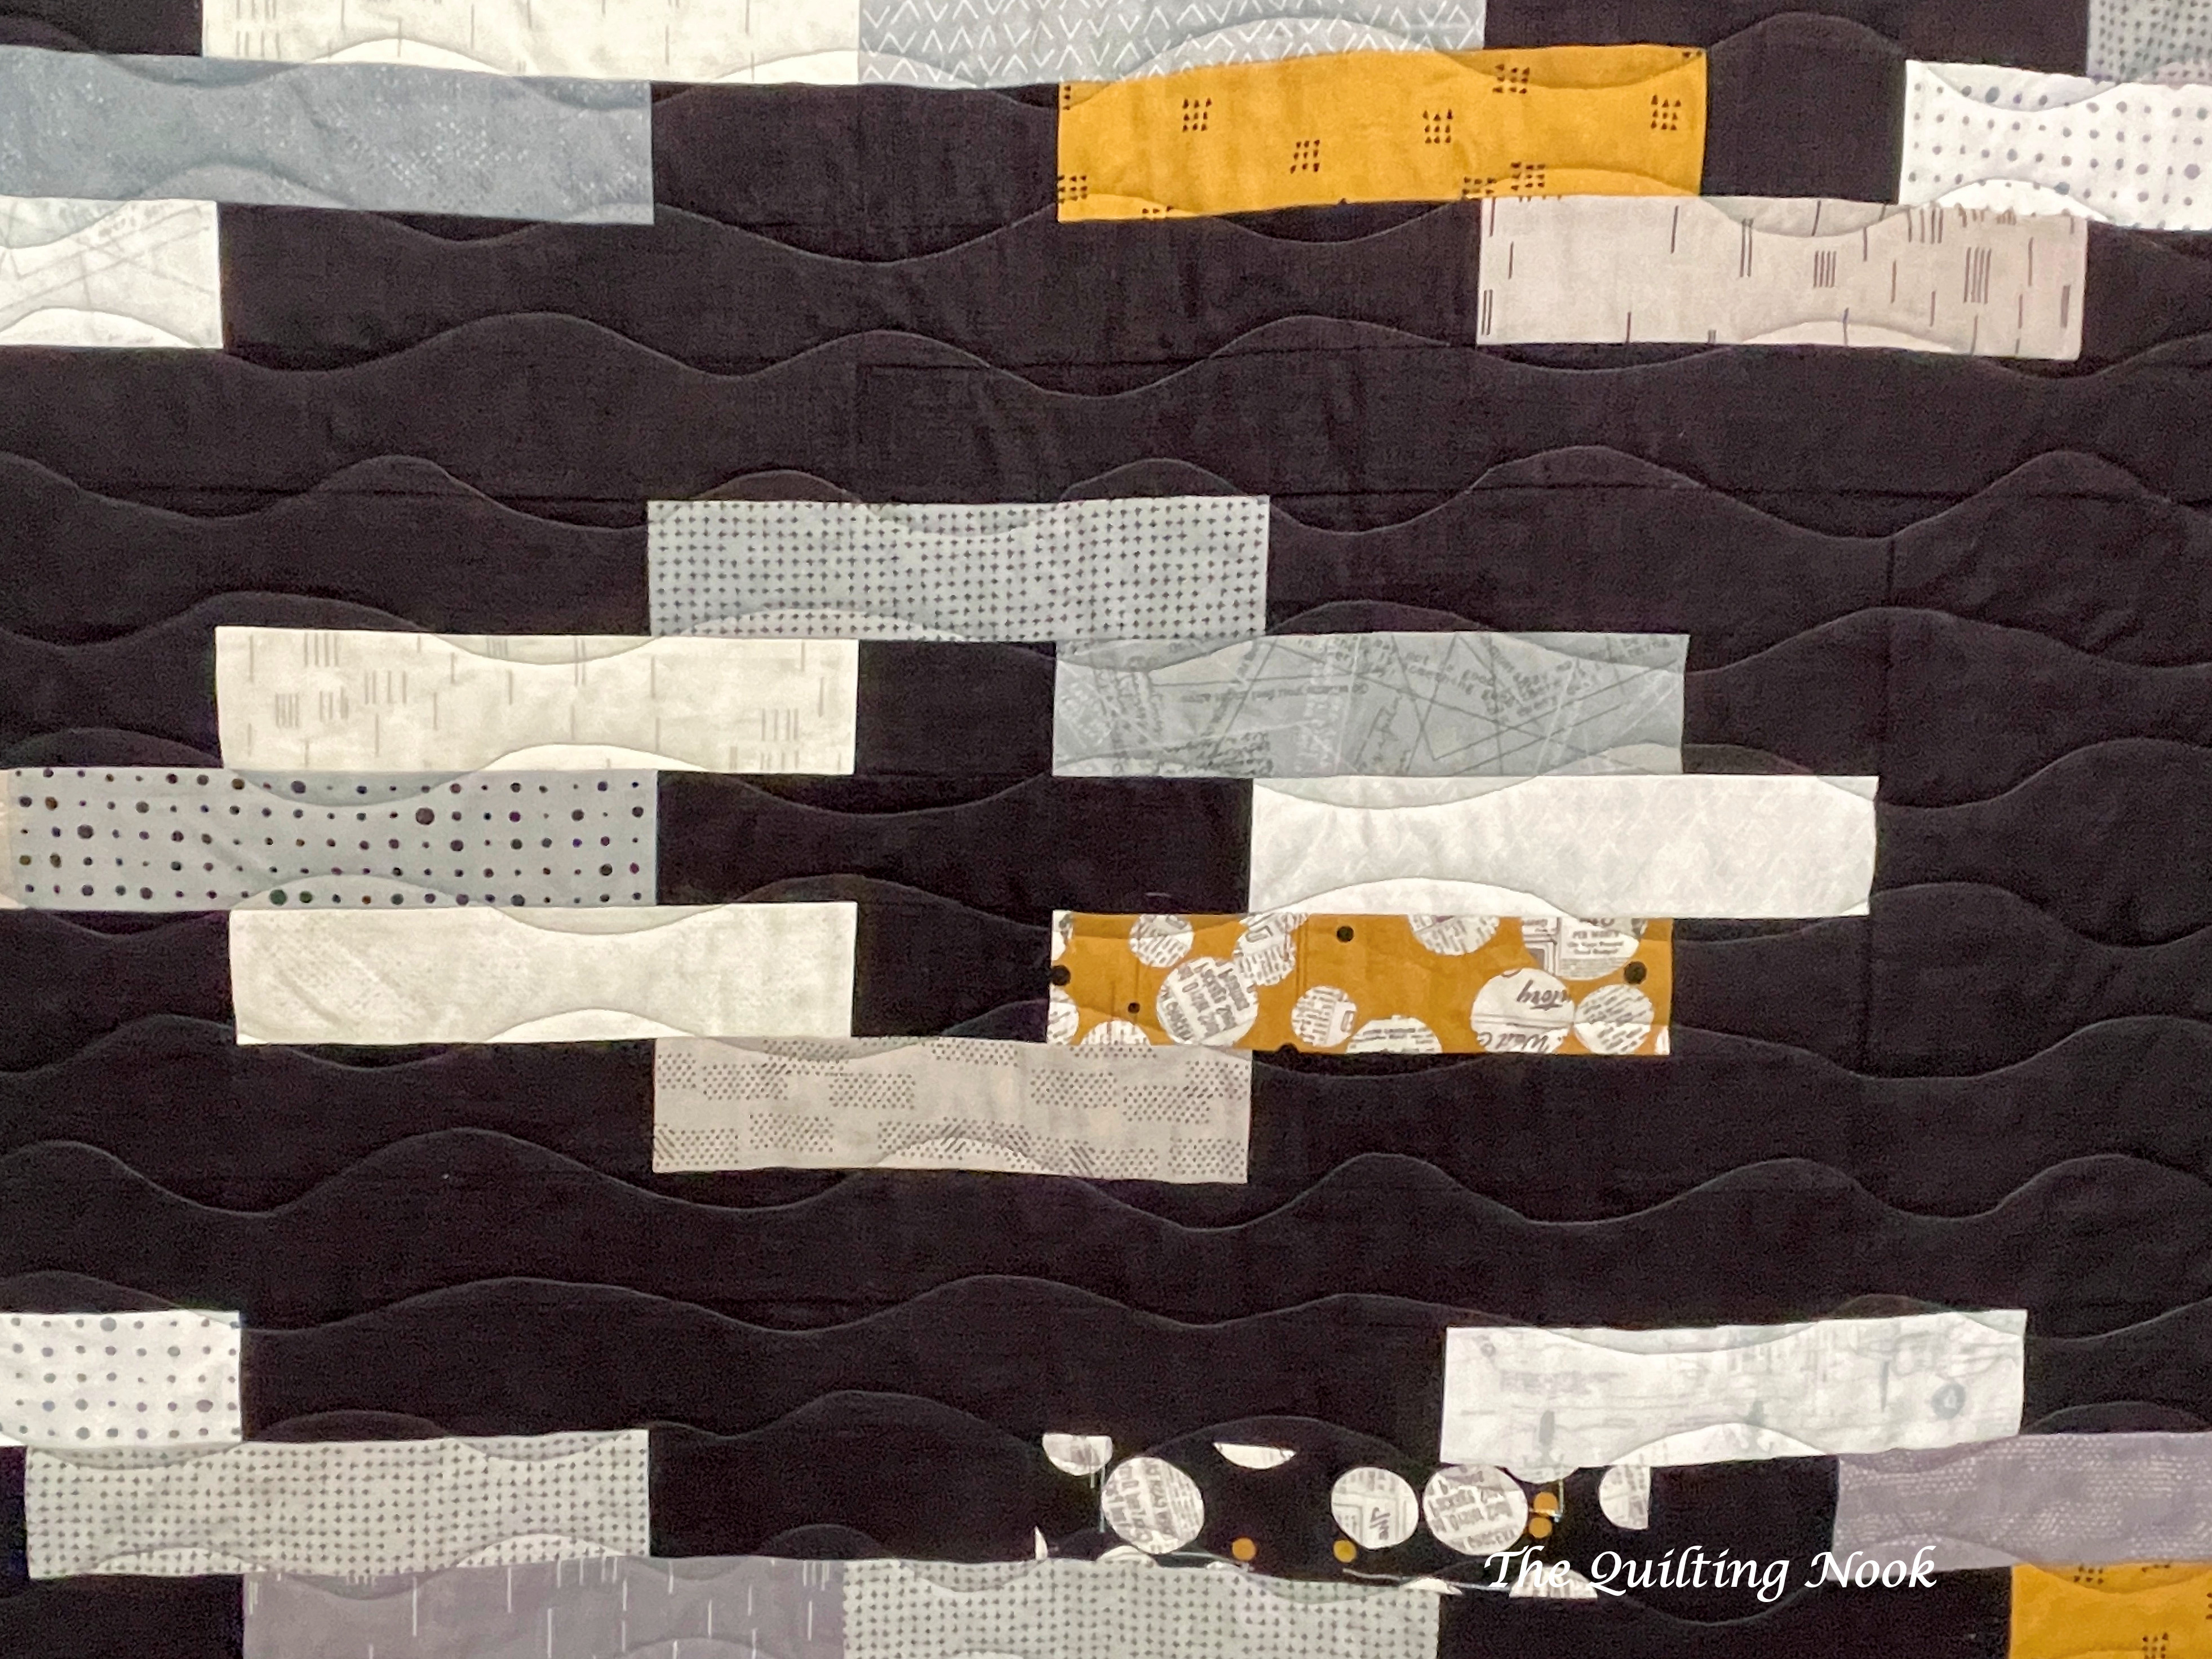 The Quilting Nook | Where I share my quilting and crafting journey